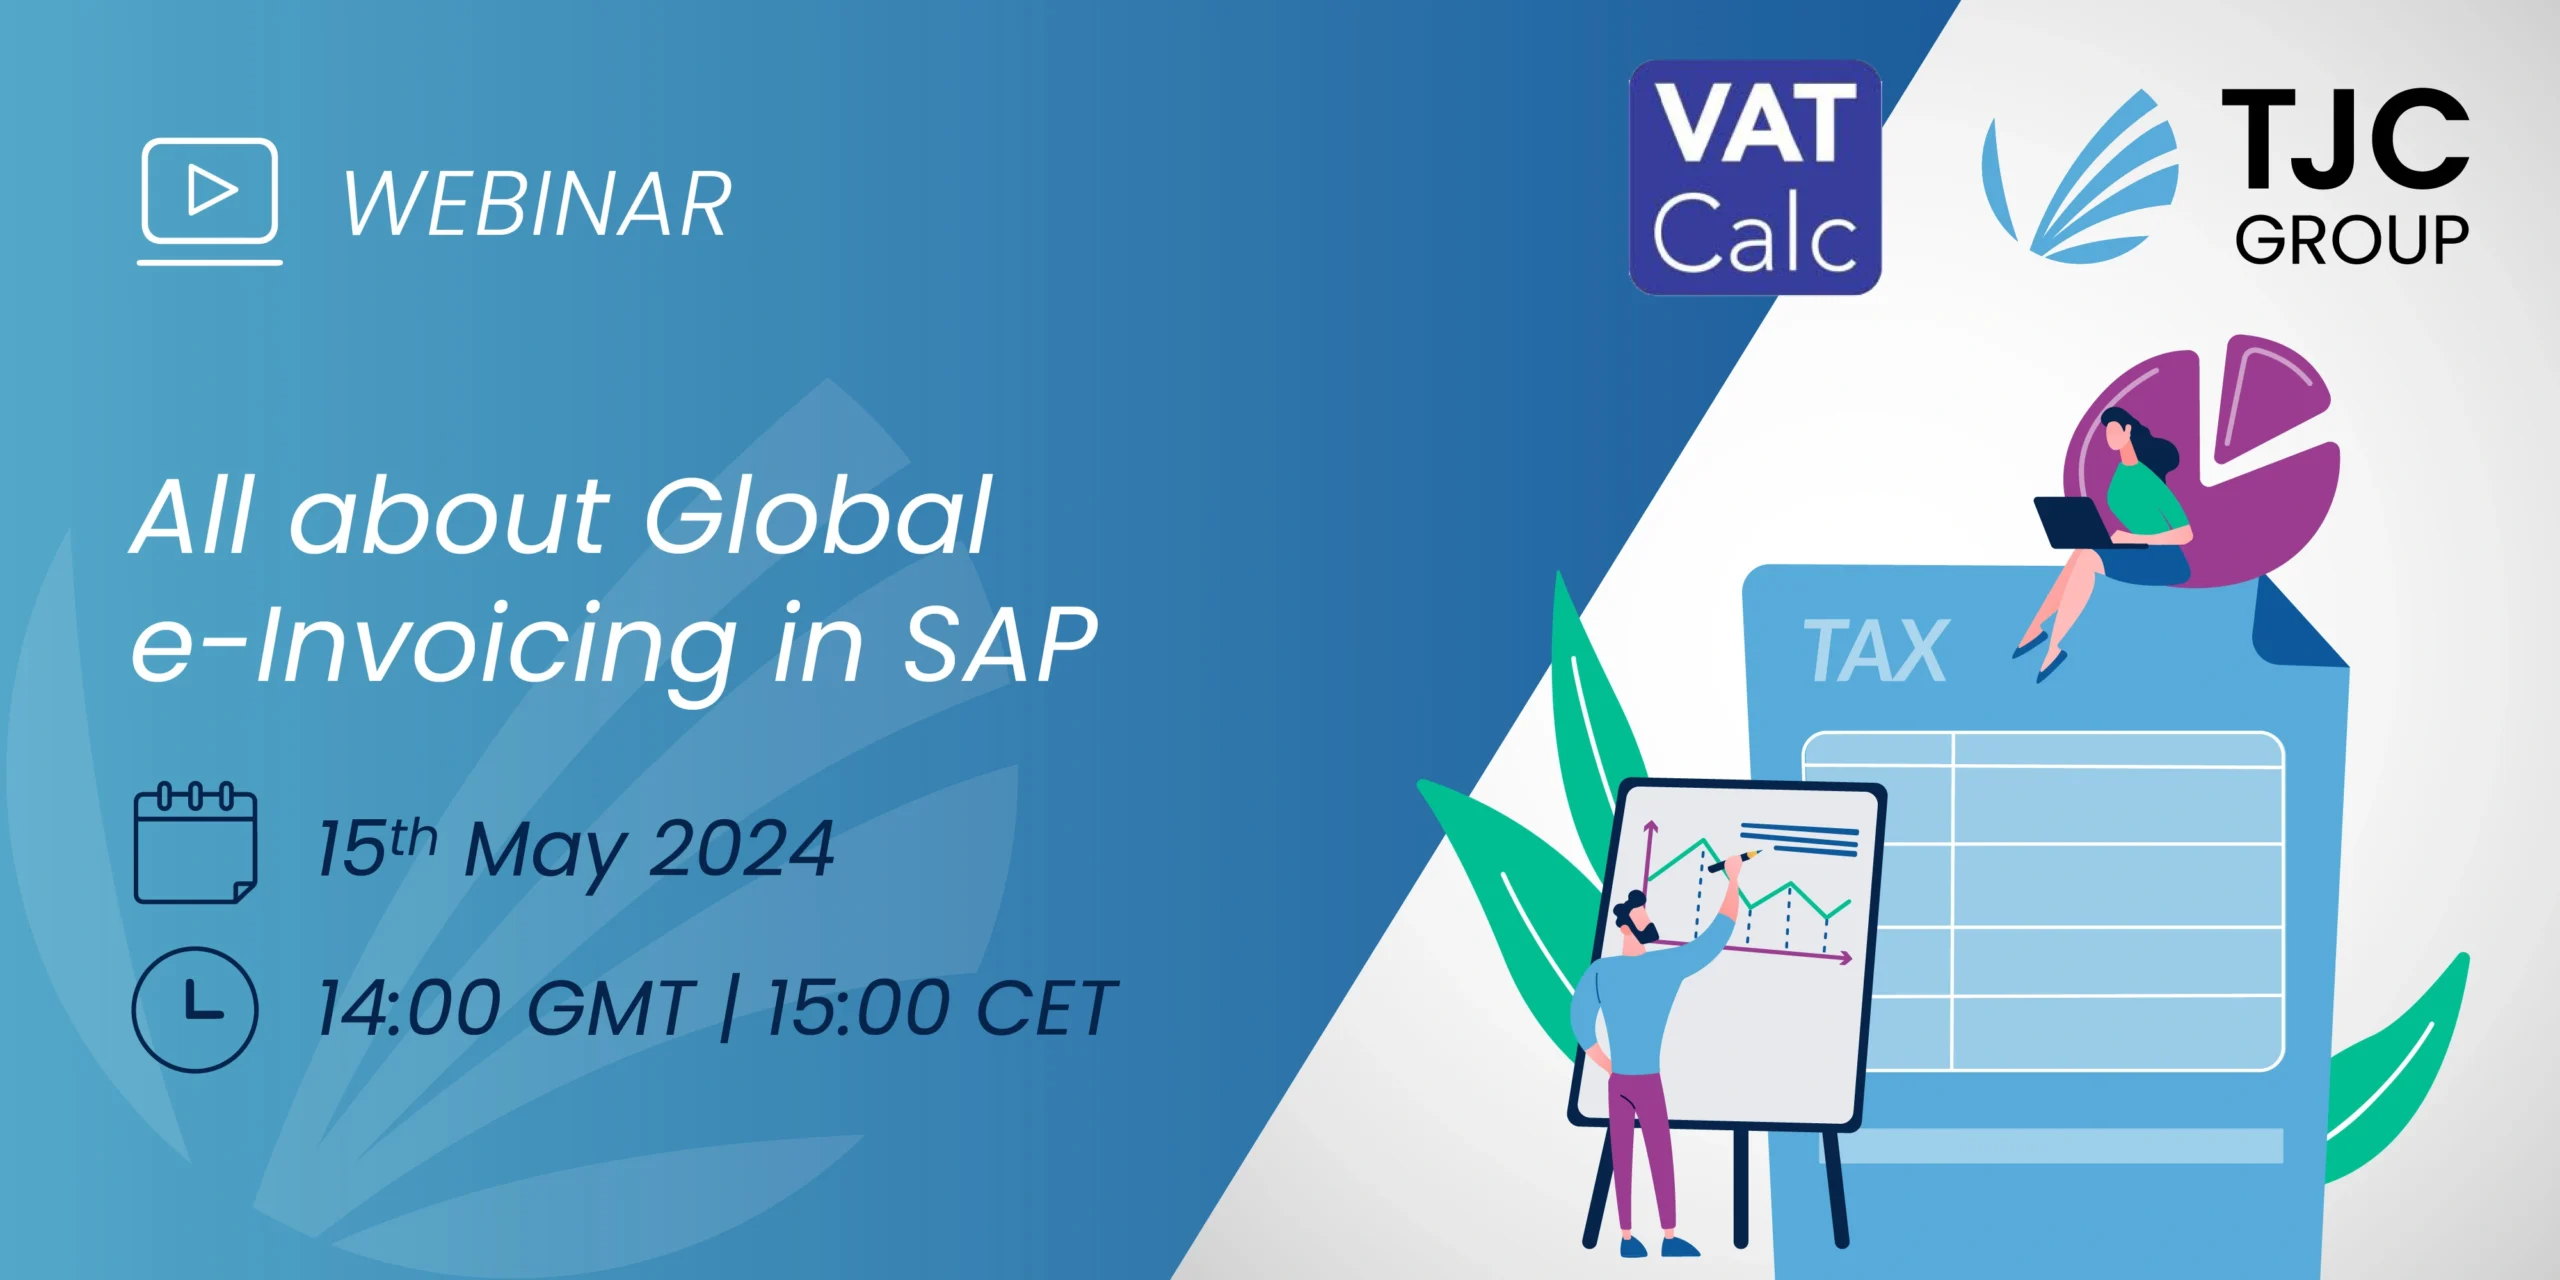 Webinar All about global e-invoicing in SAP